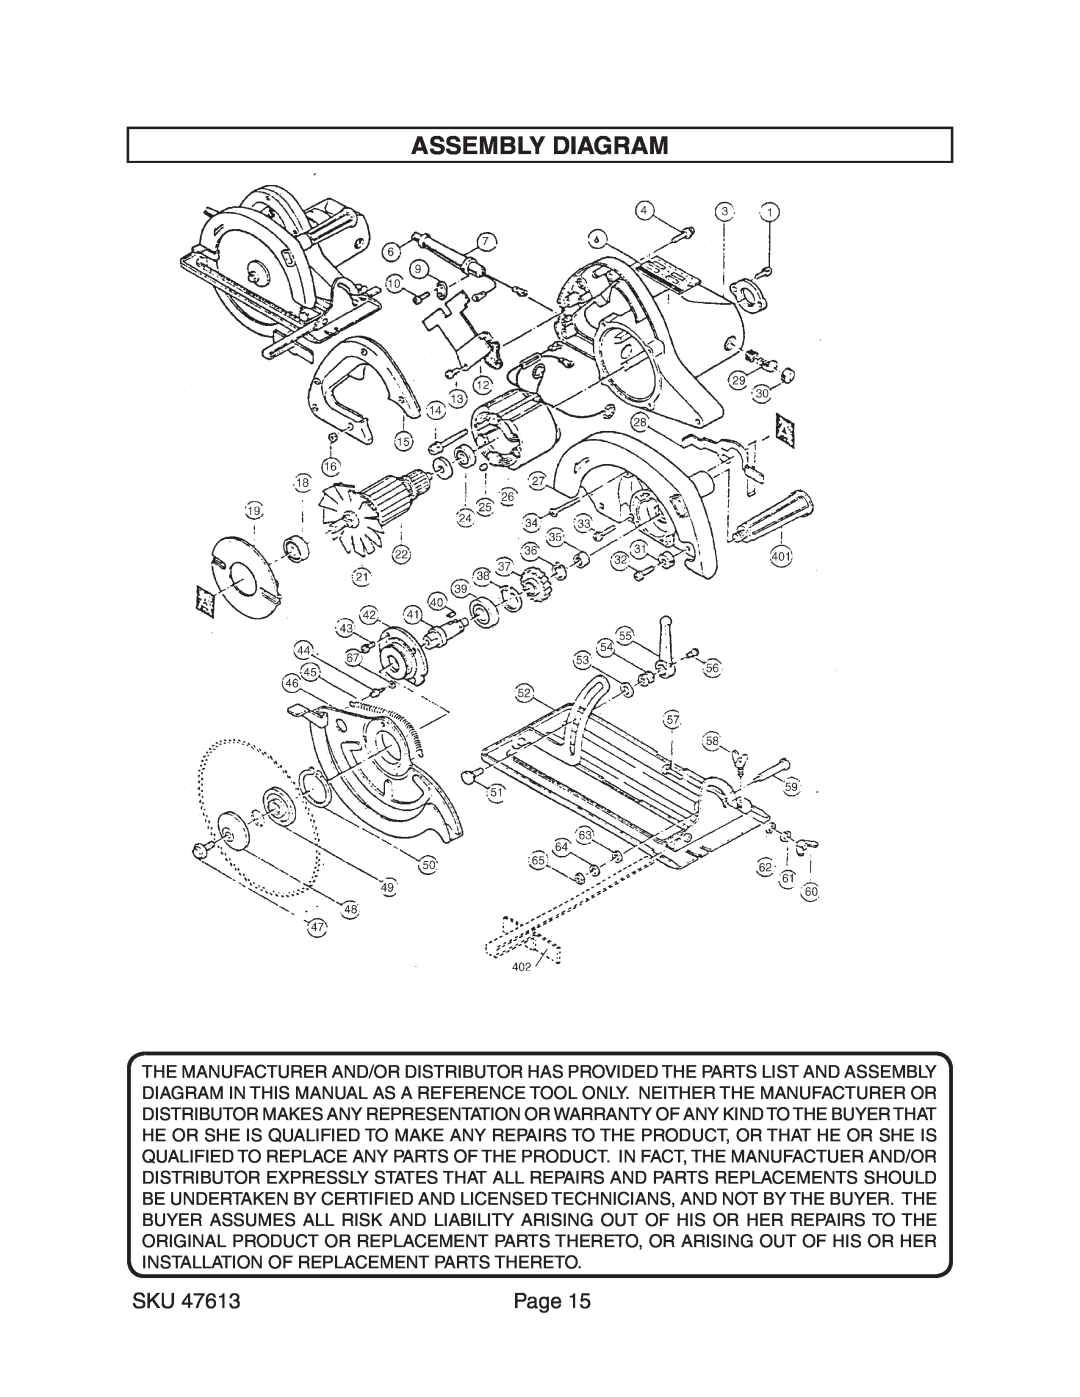 Harbor Freight Tools 47613 operating instructions Assembly Diagram, Page 